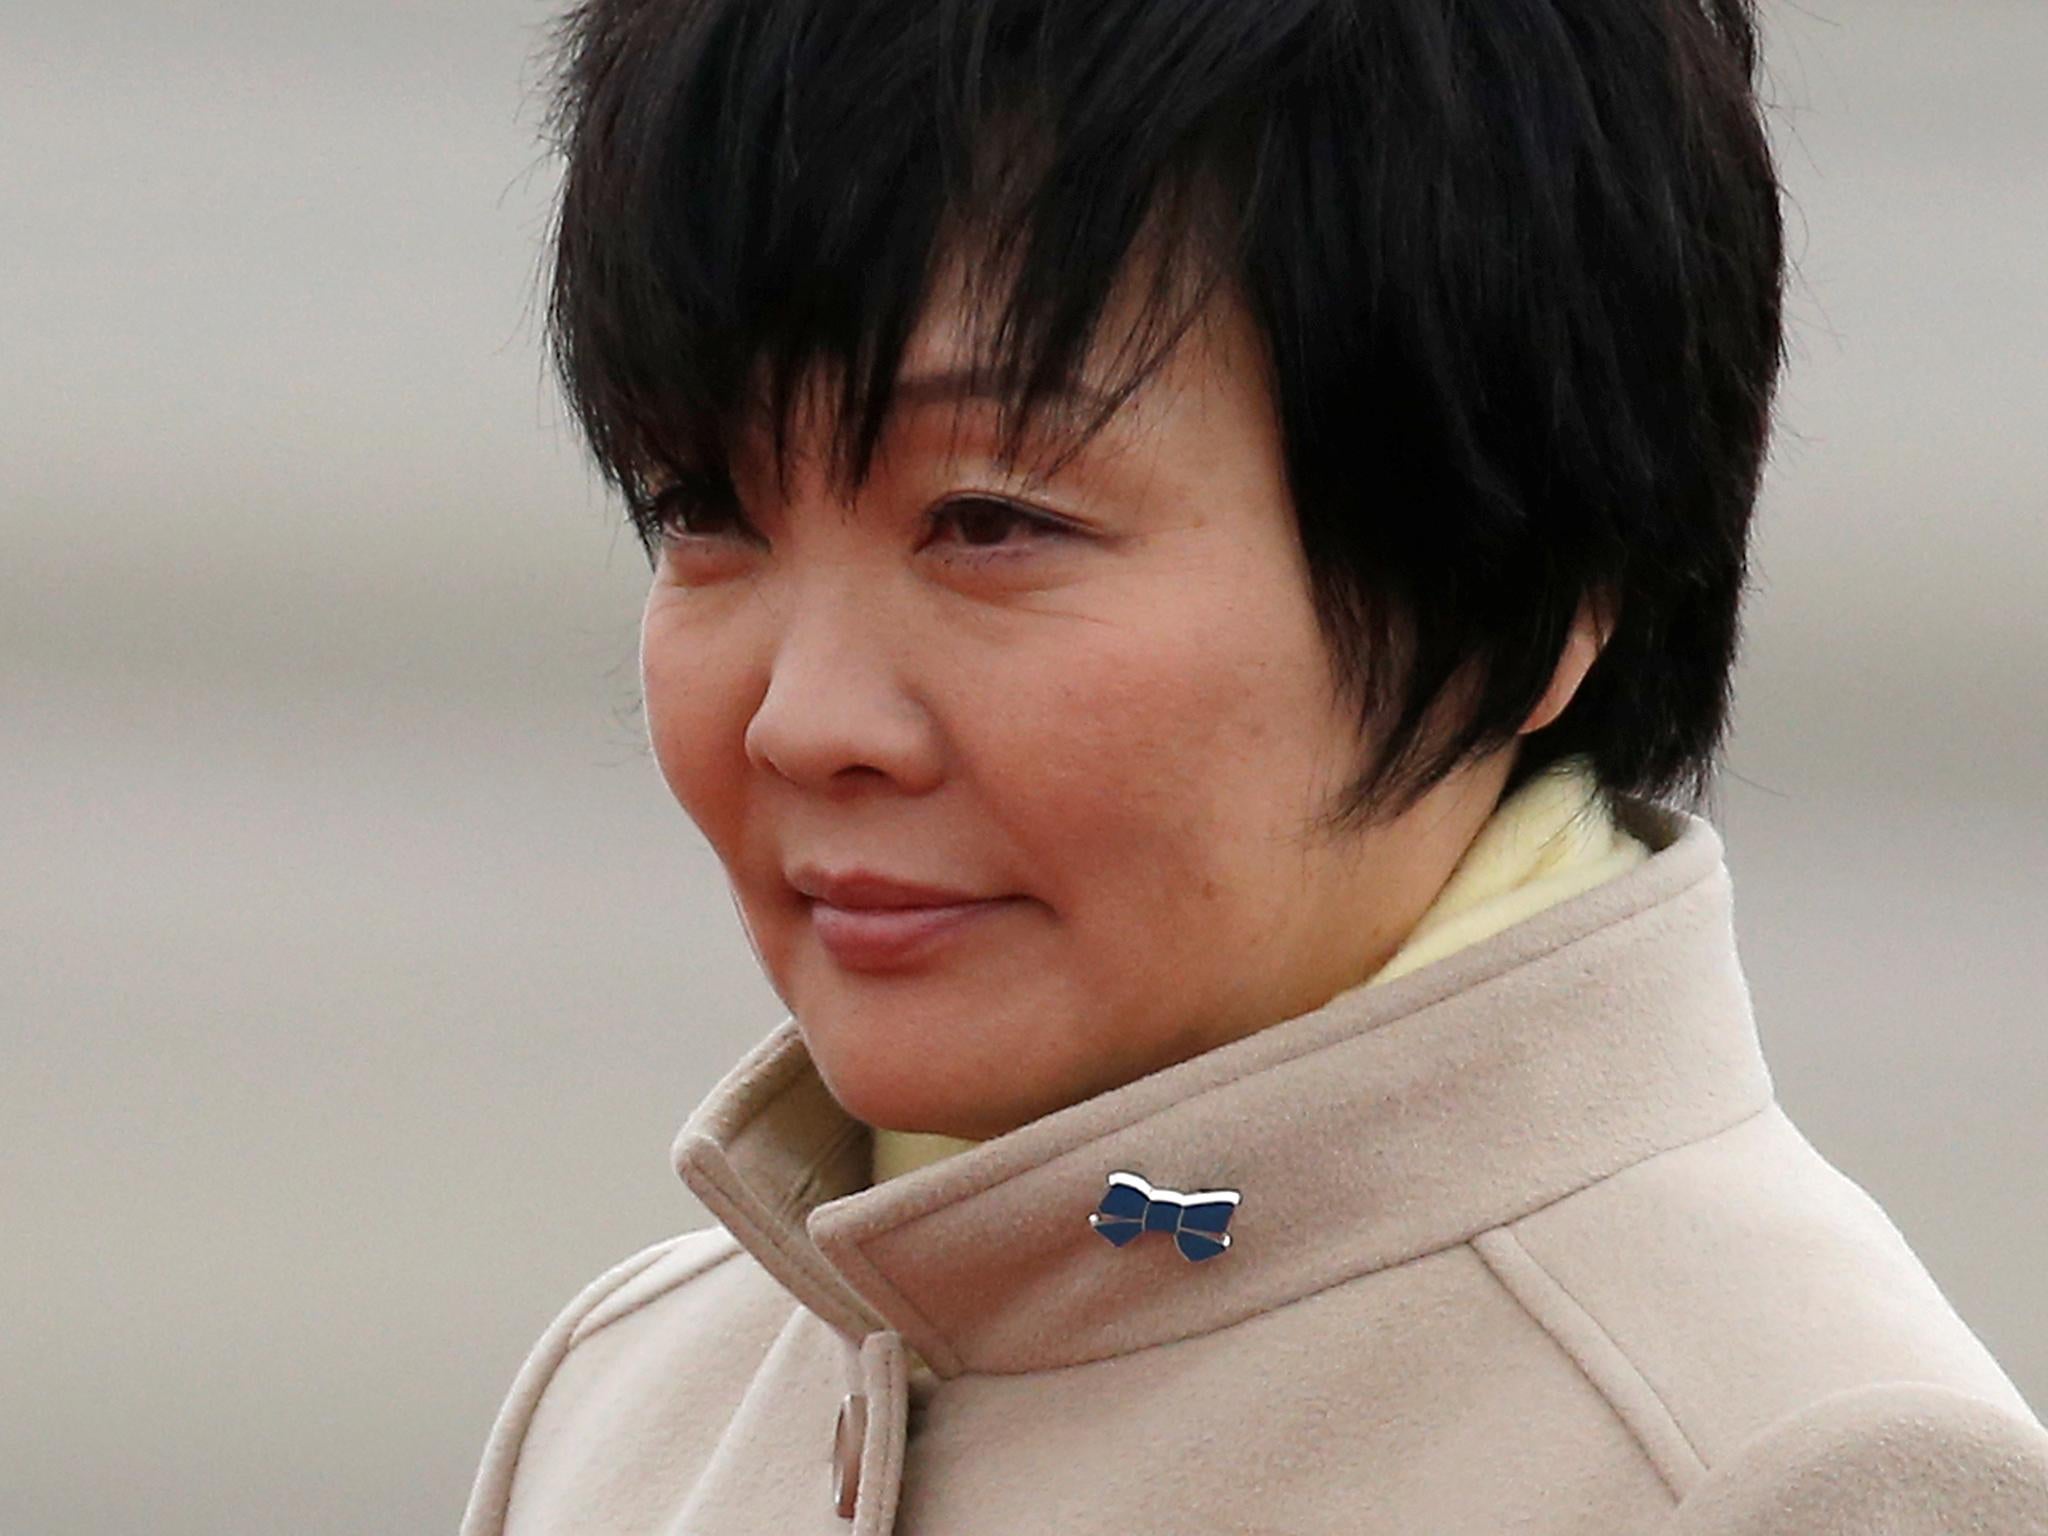 Japanese first lady Akie Abe